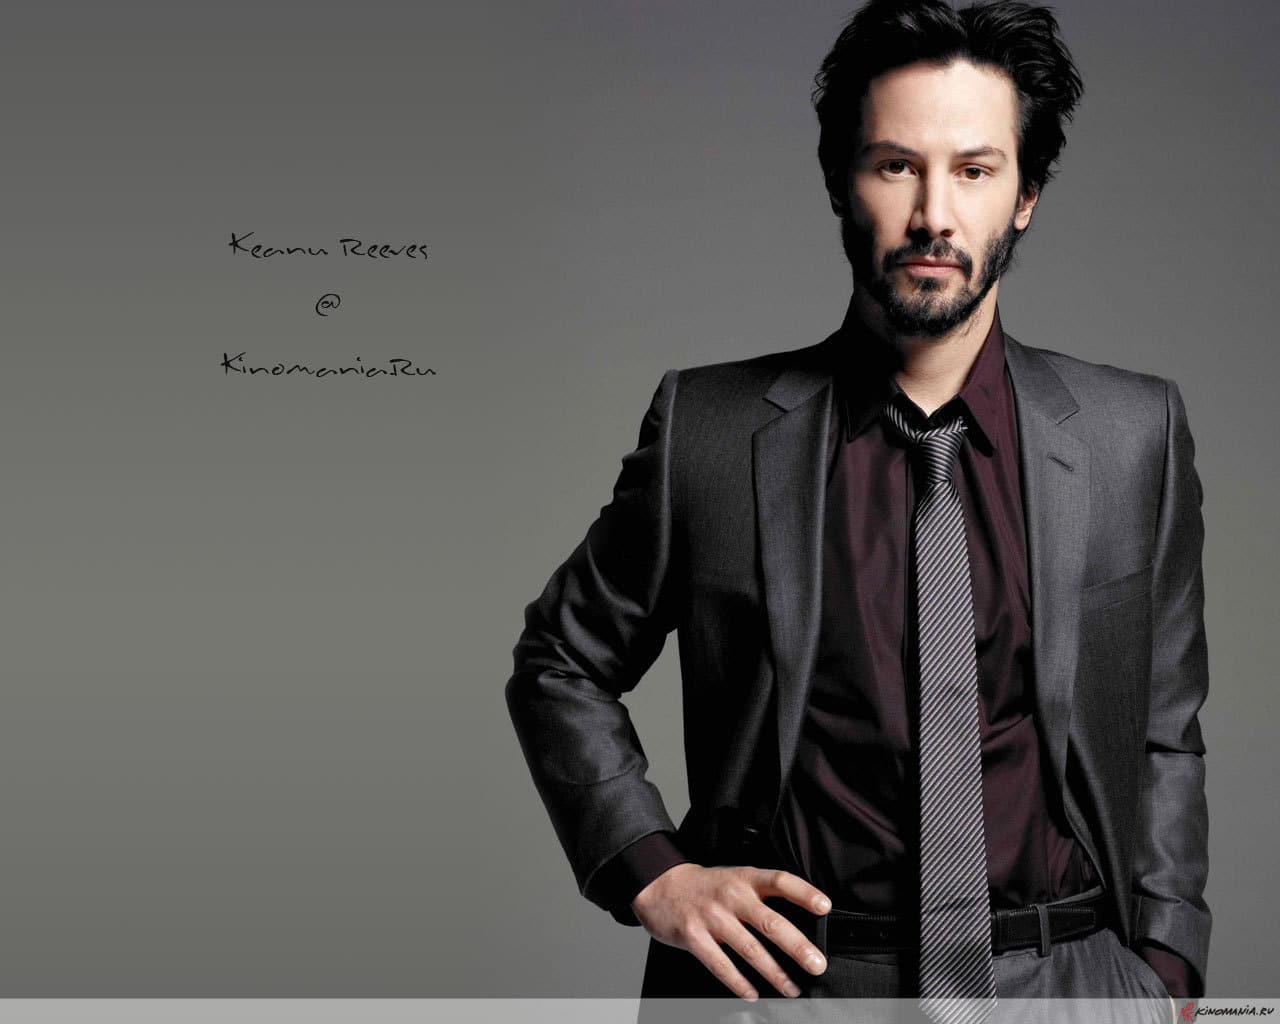 Keanu Reeves Time Magazine’s 2019 person of the year